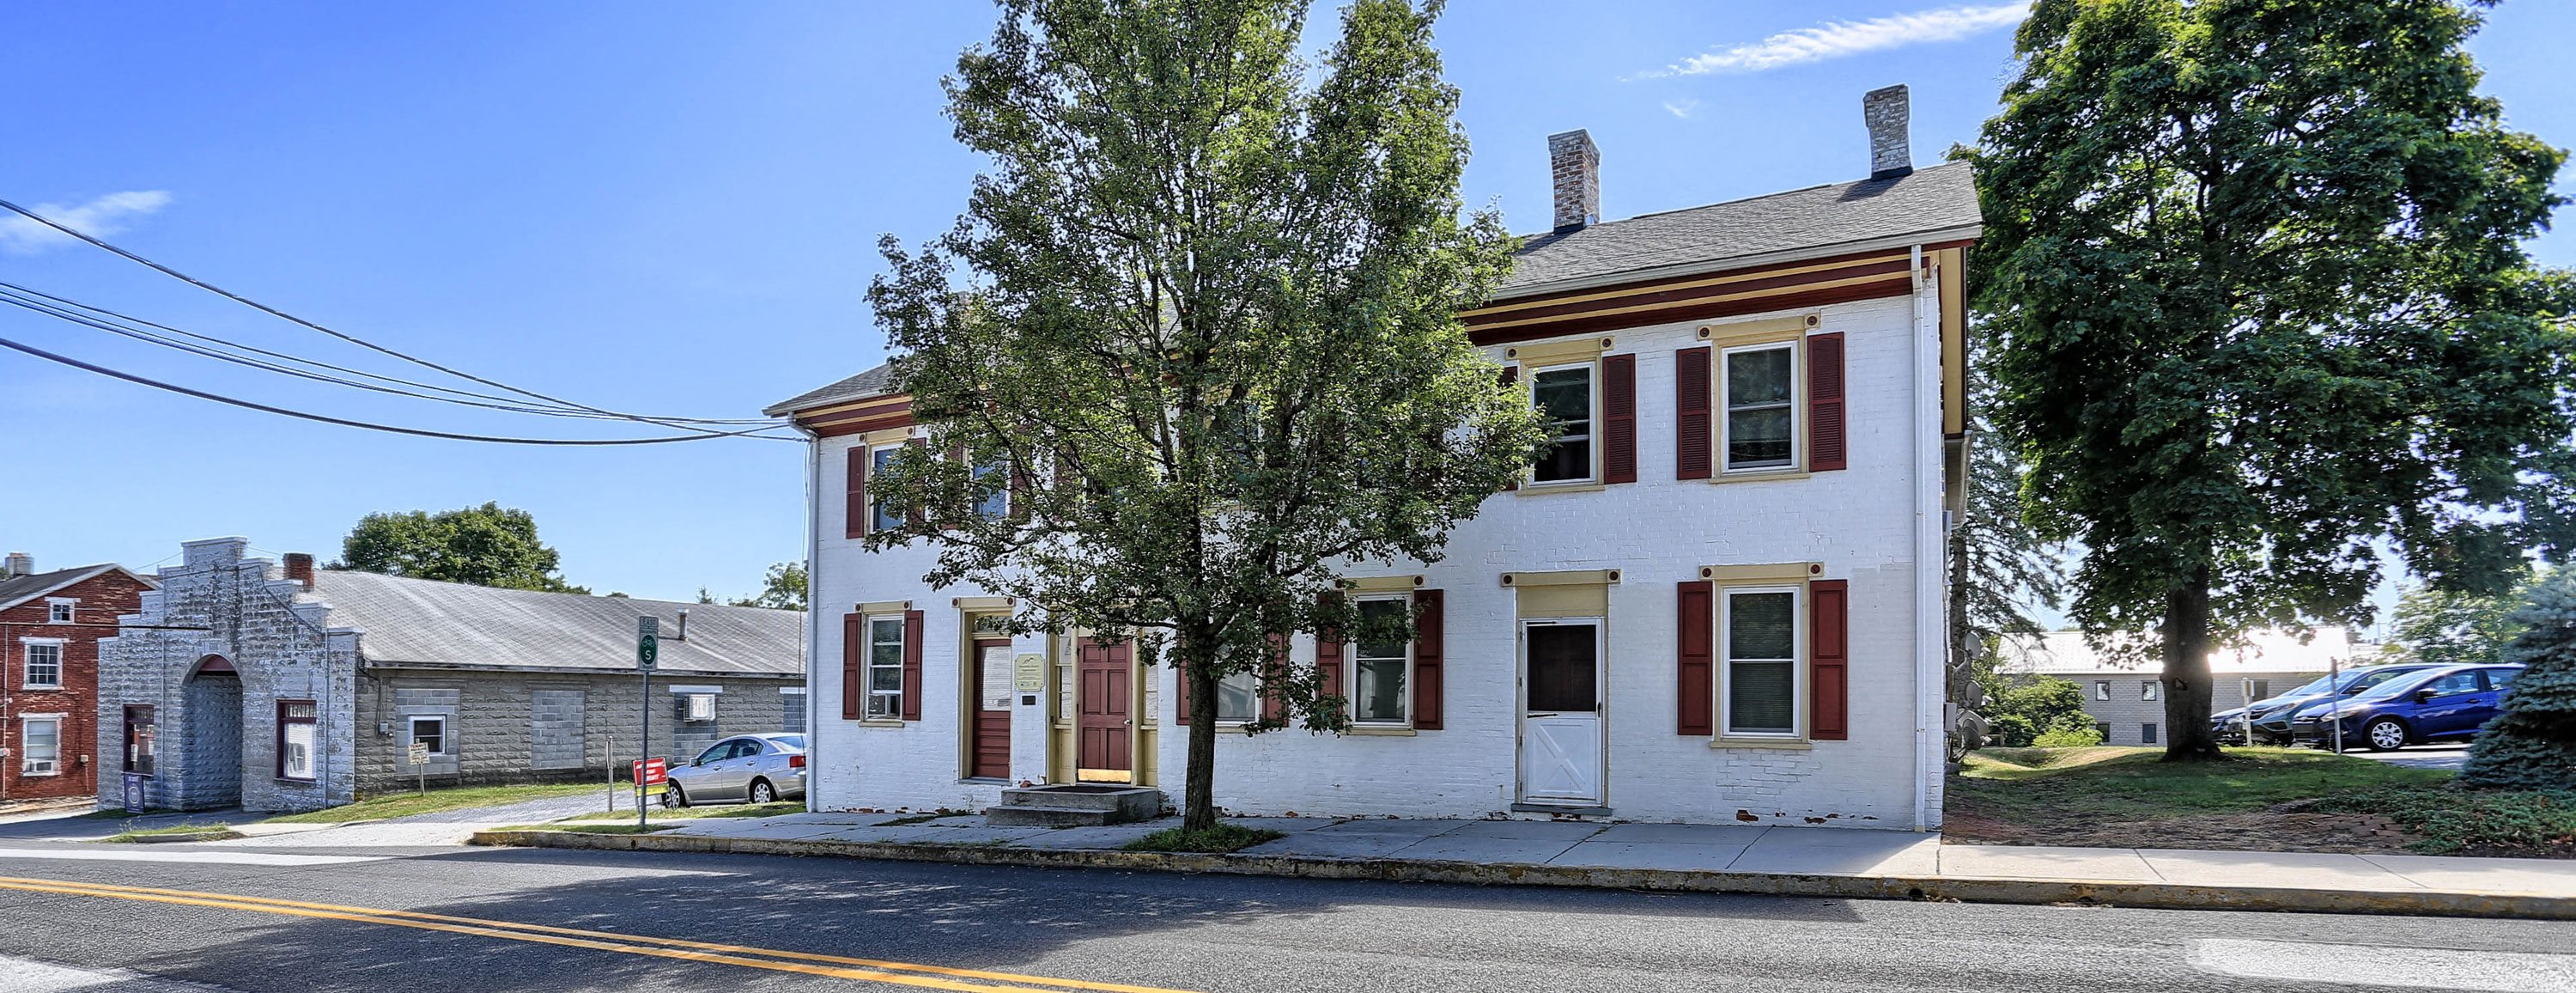 Arendtsville Apartments in Arendtsville, PA | Mountain House | Property Management, Inc.